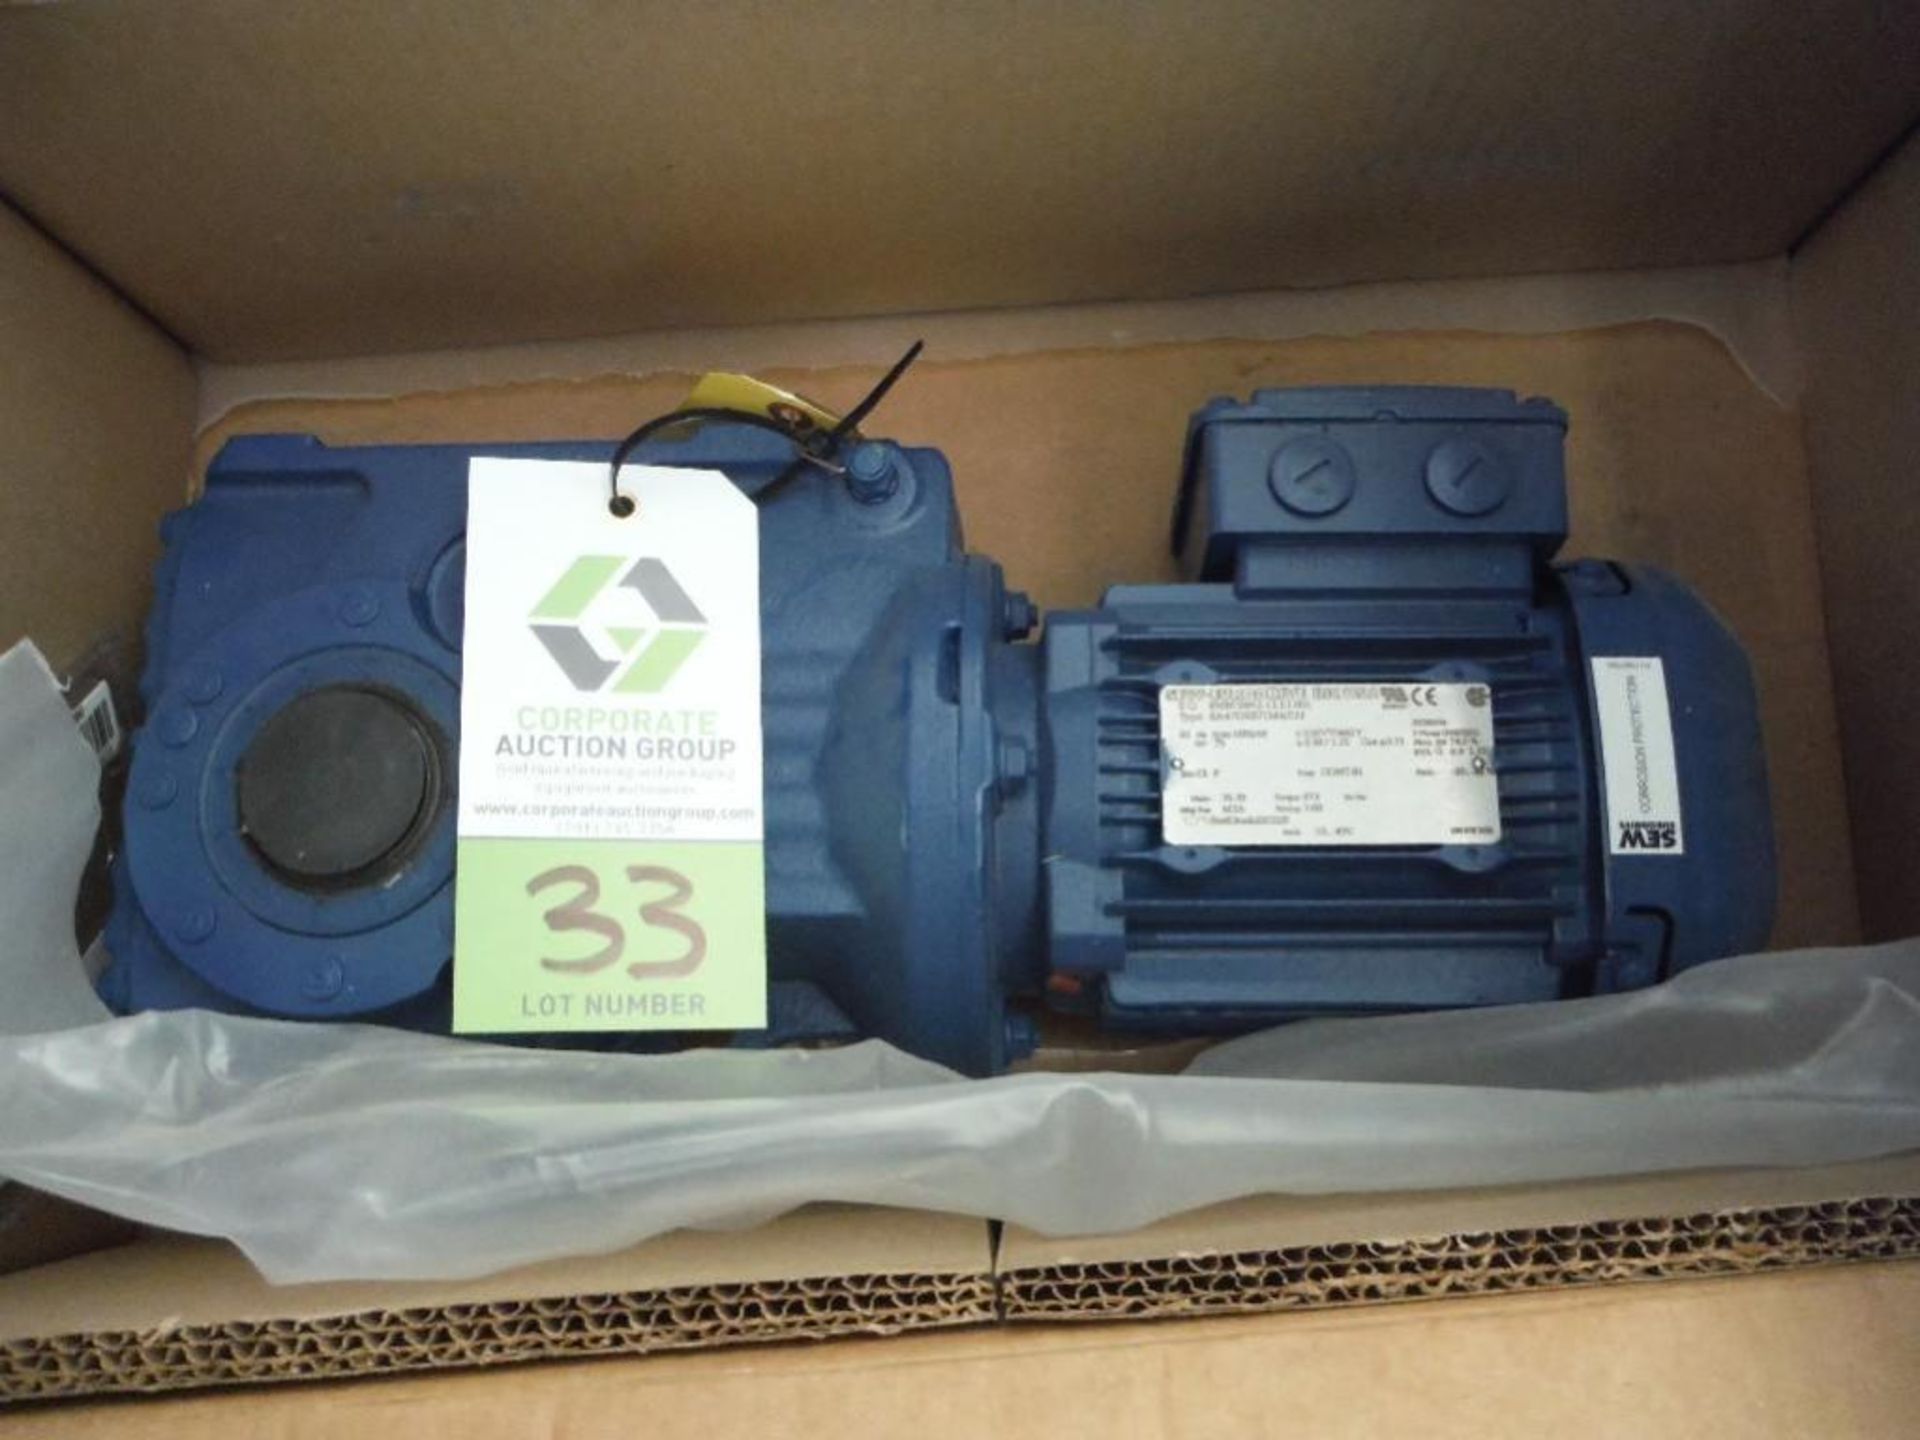 New SEW electric motor and gear reducers, 0.75 hp, 3 ph, 1690 rpm - Rigging Fee: $20 - Image 3 of 3